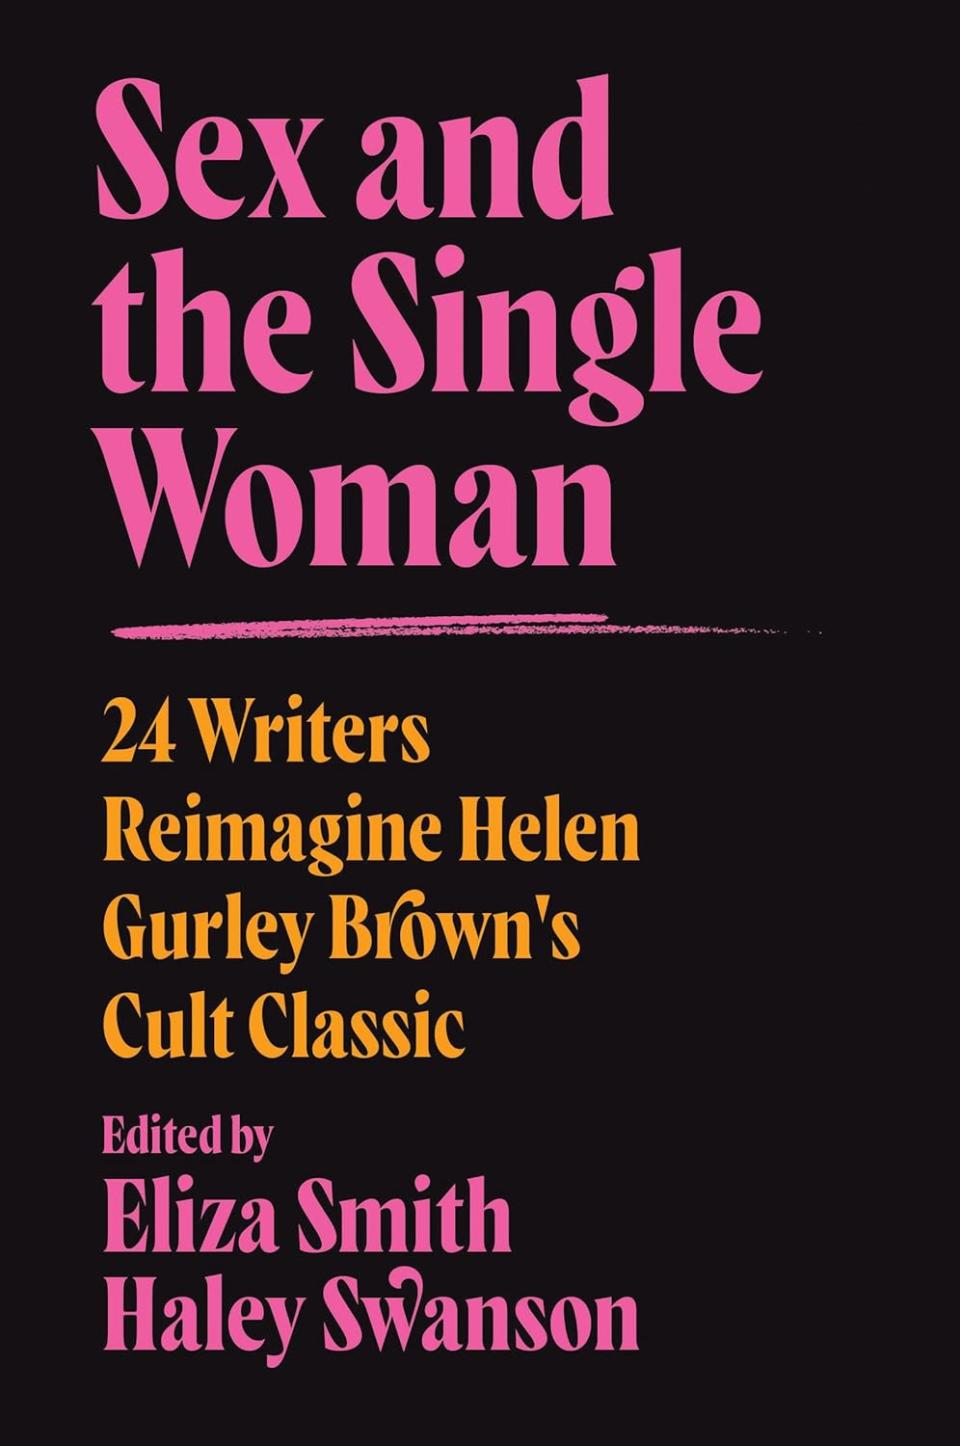 "Sex and the Single Woman"